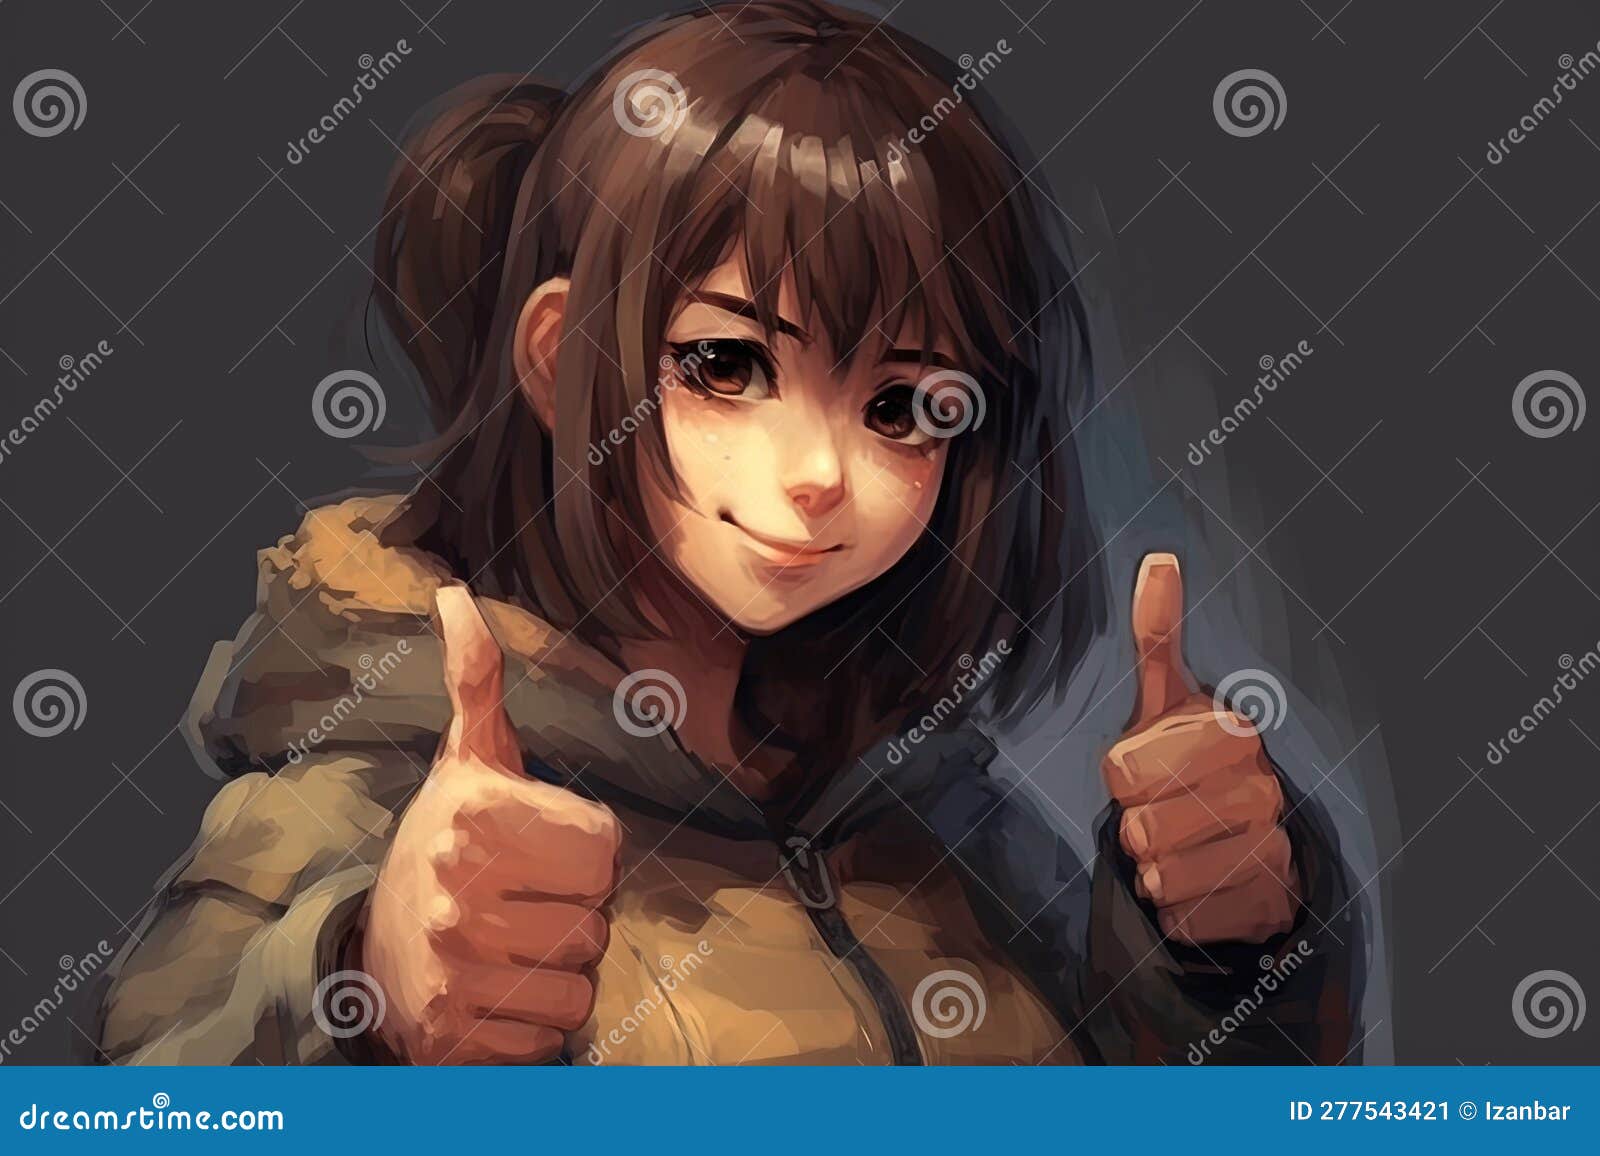 10 Mar - Anime Thumbs Up Emote Transparent PNG - 500x500 - Free Download on  NicePNG